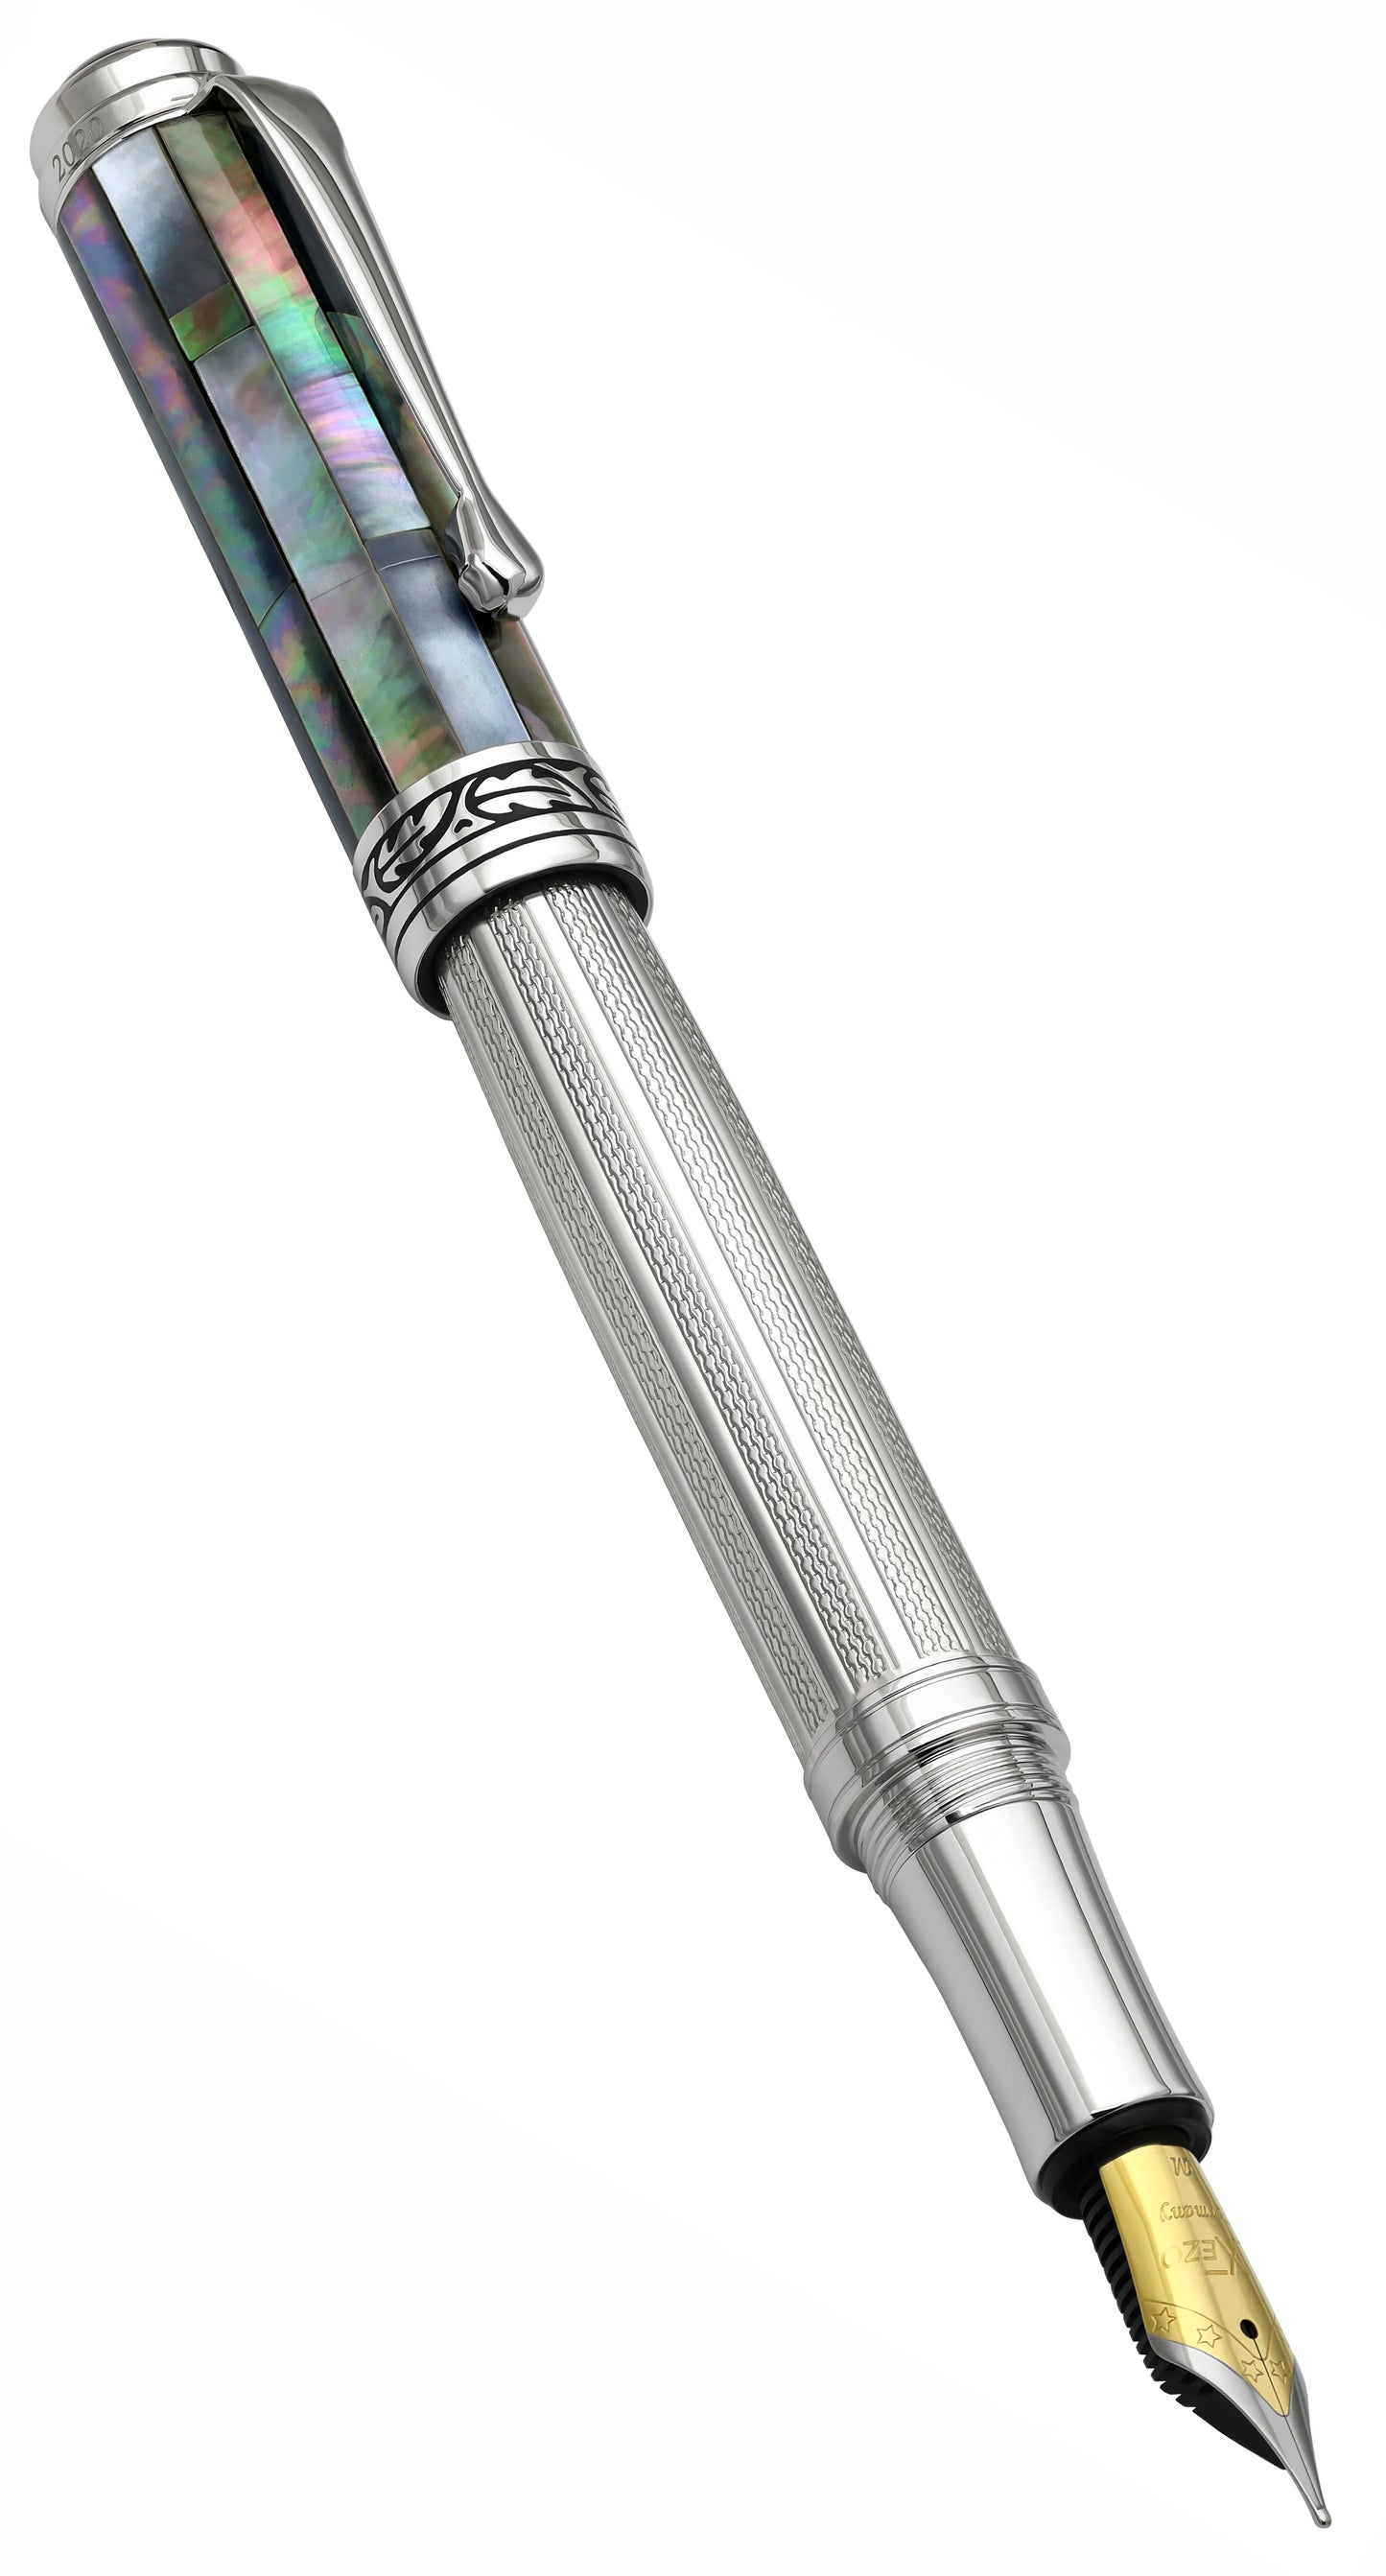 Xezo - Angled front view of the Maestro 925 BL MOP FM fountain pen, with the cap posted on the end of the barrel